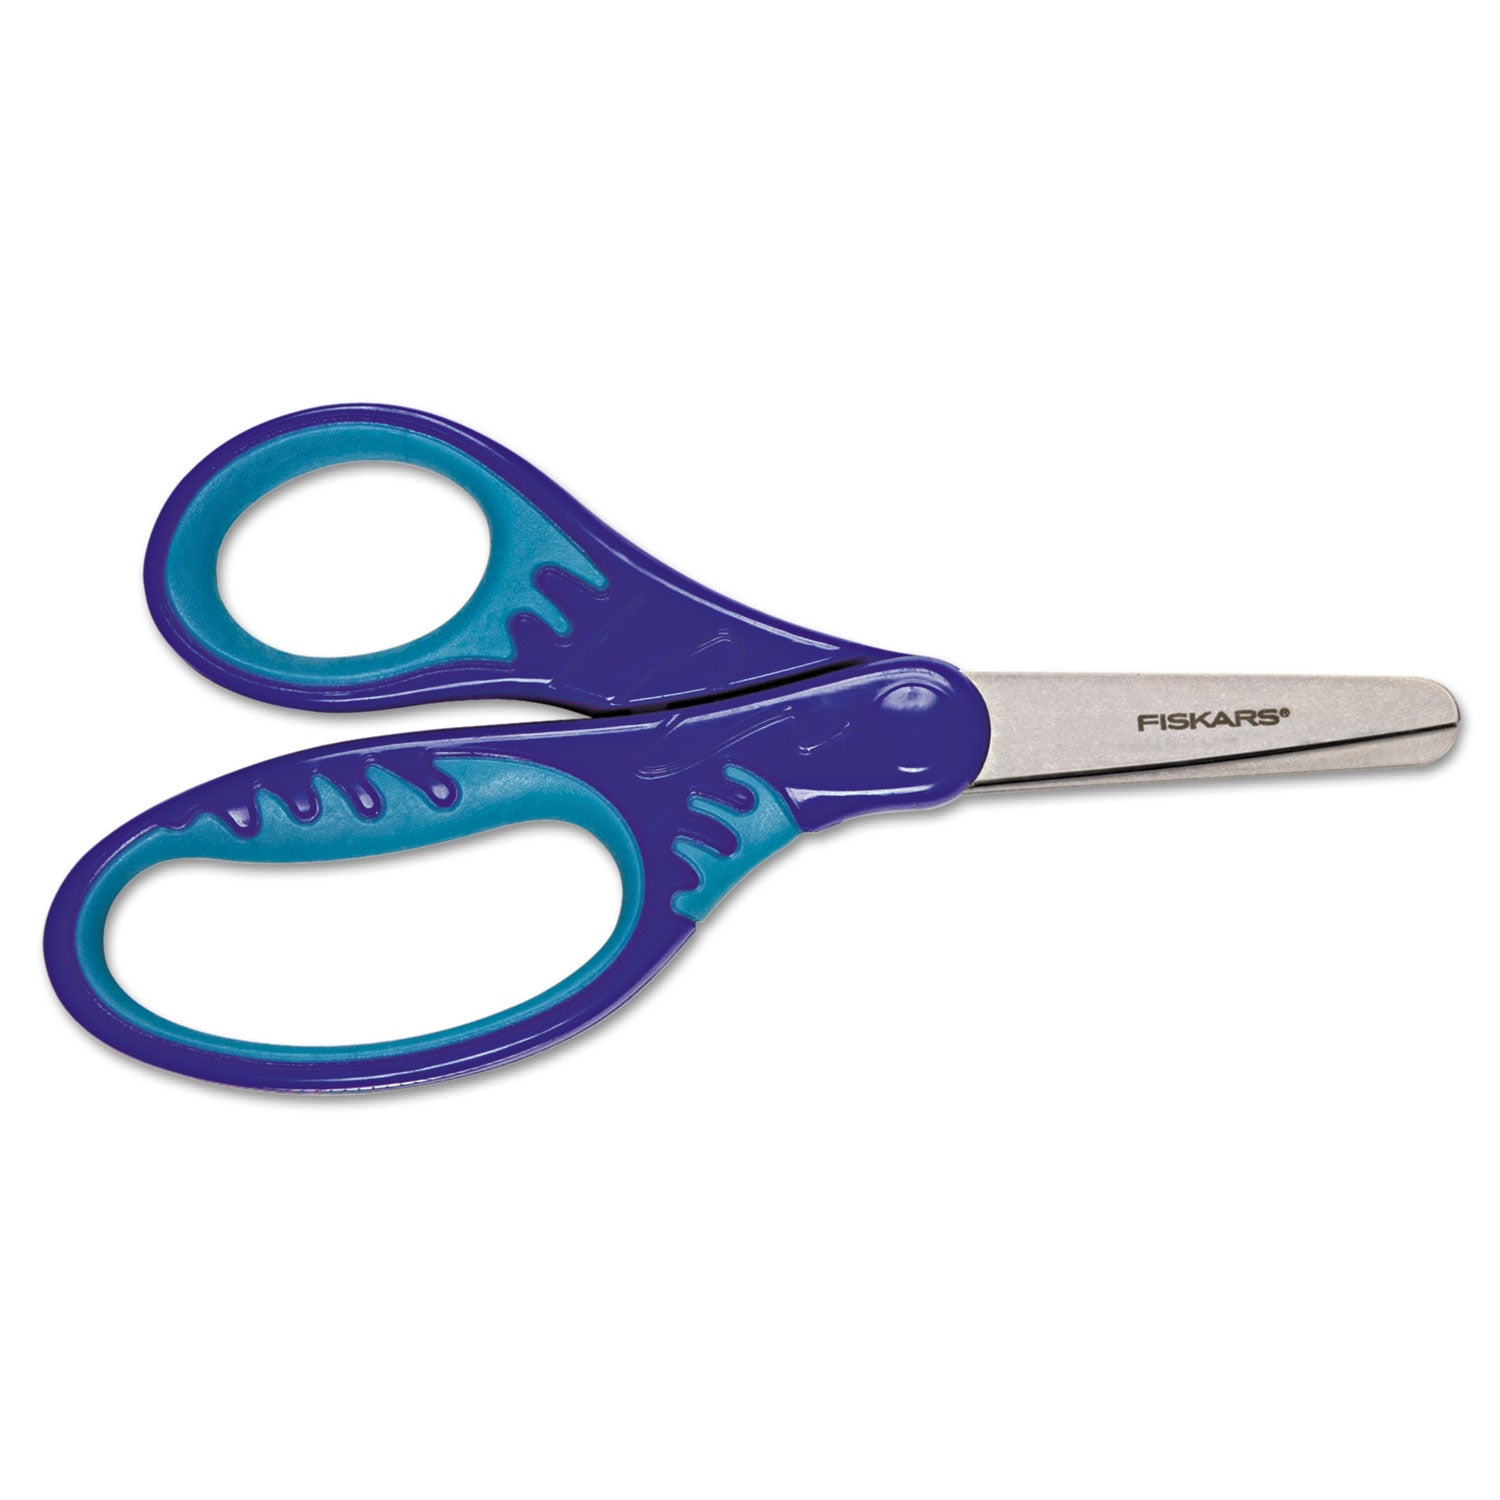 Kids/Student Softgrip Scissors, Rounded Tip, 5 Long, 1.75 Cut Length, Randomly Assorted Straight Handles - 